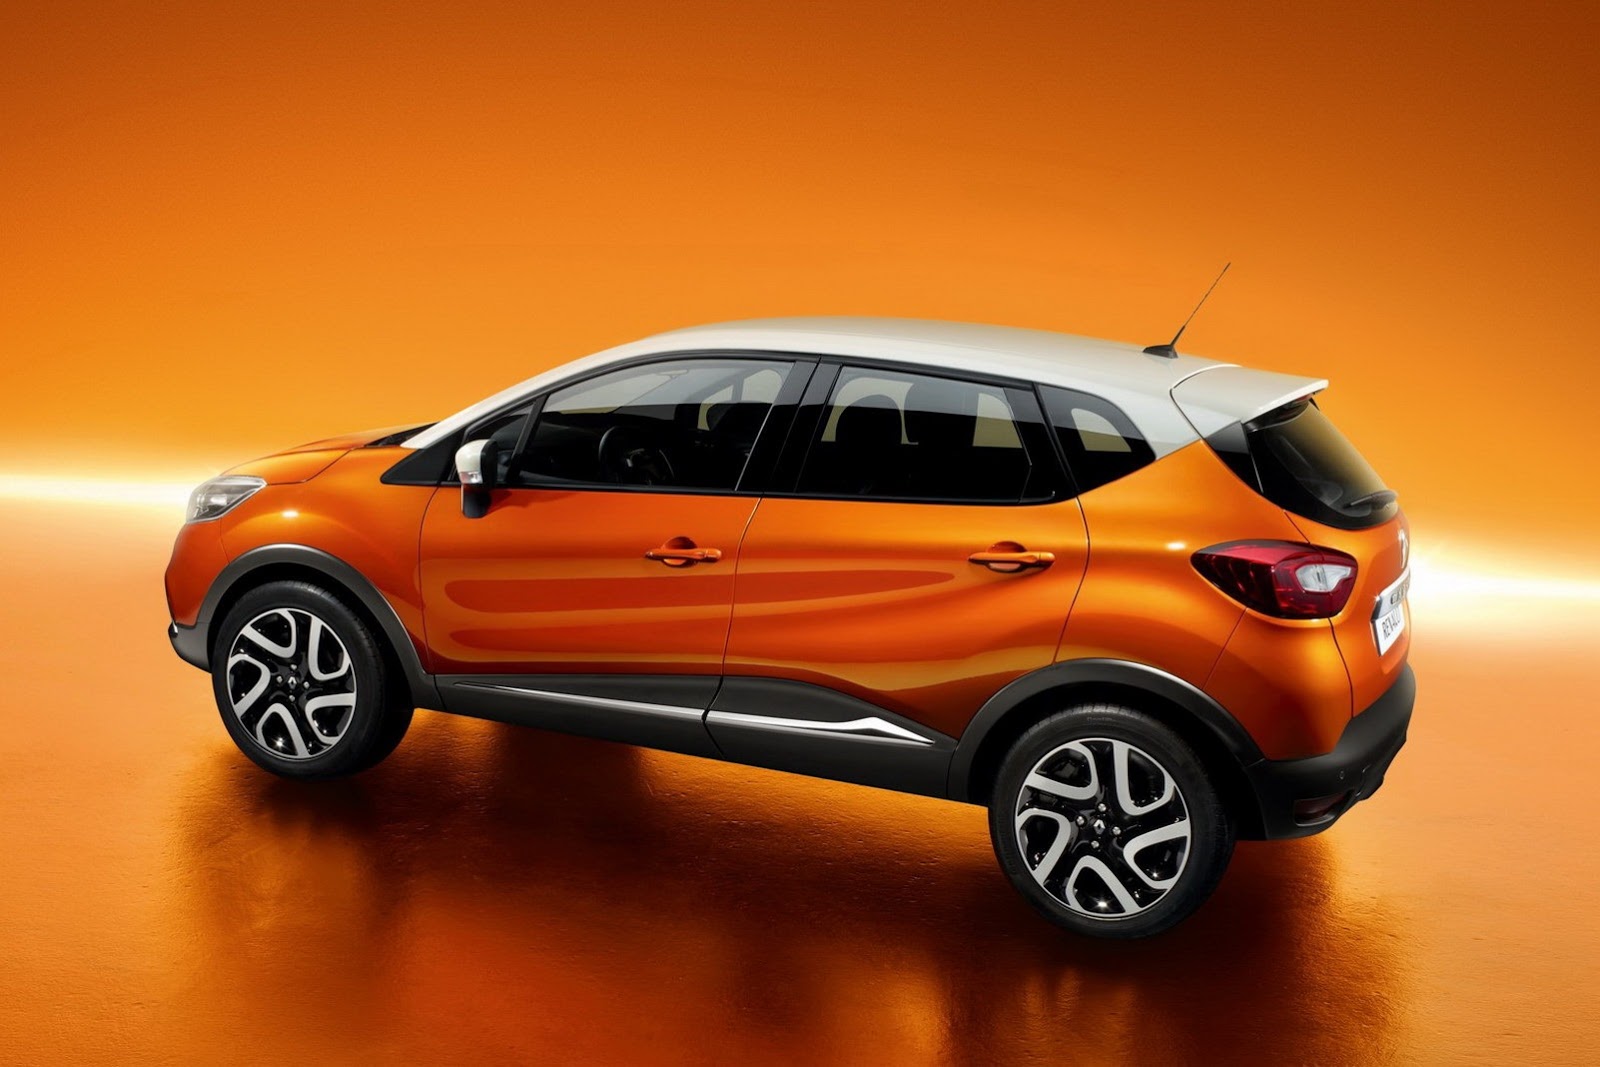 New Renault Captur Puts a Crossover Twist to the Clio